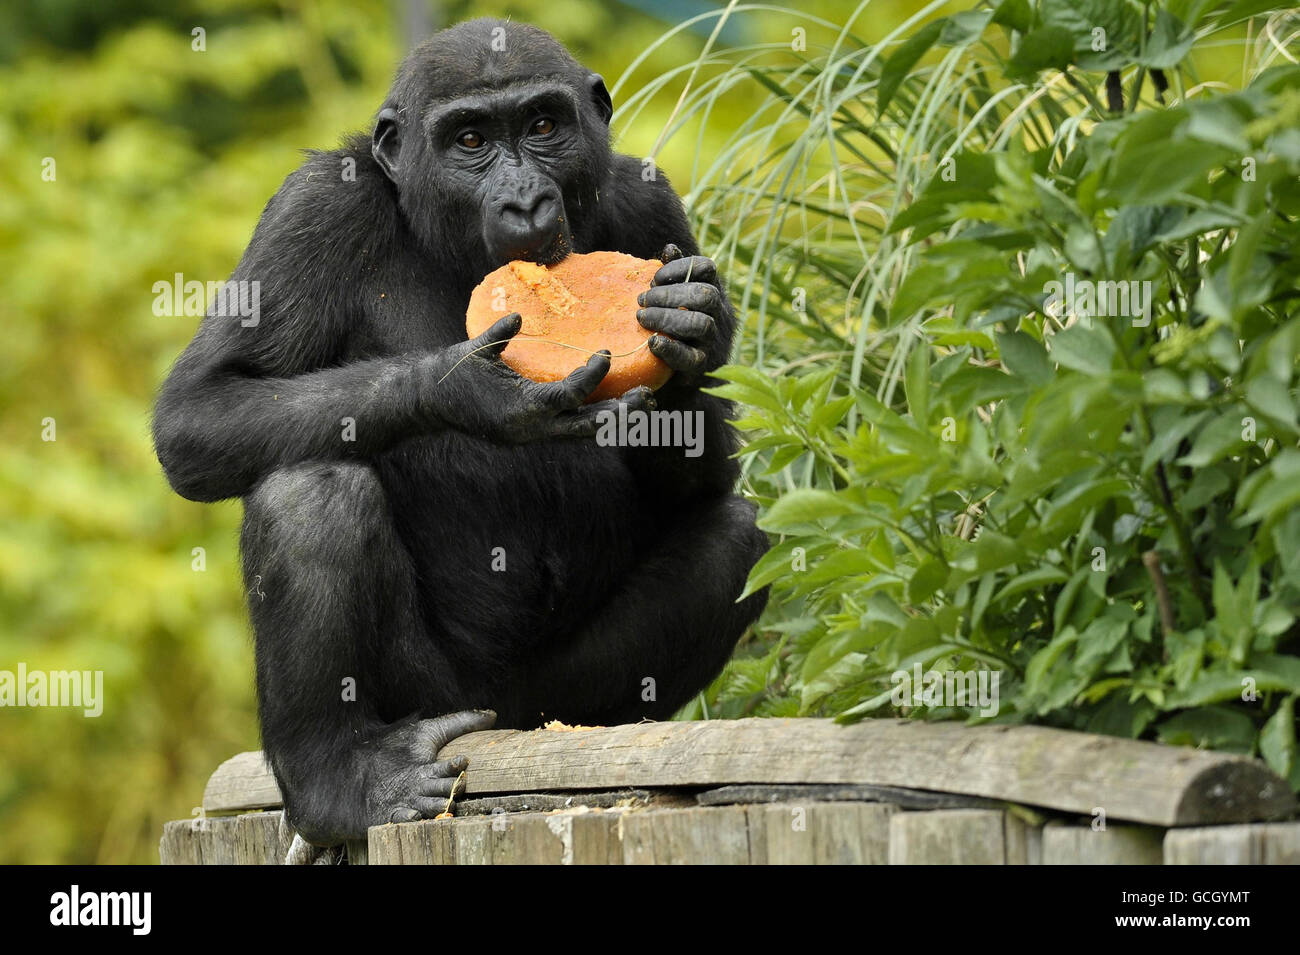 Three-year-old western lowland gorilla Komale enjoys an iced treat given to him by keepers at Bristol Zoo Gardens during the warm weather. Stock Photo